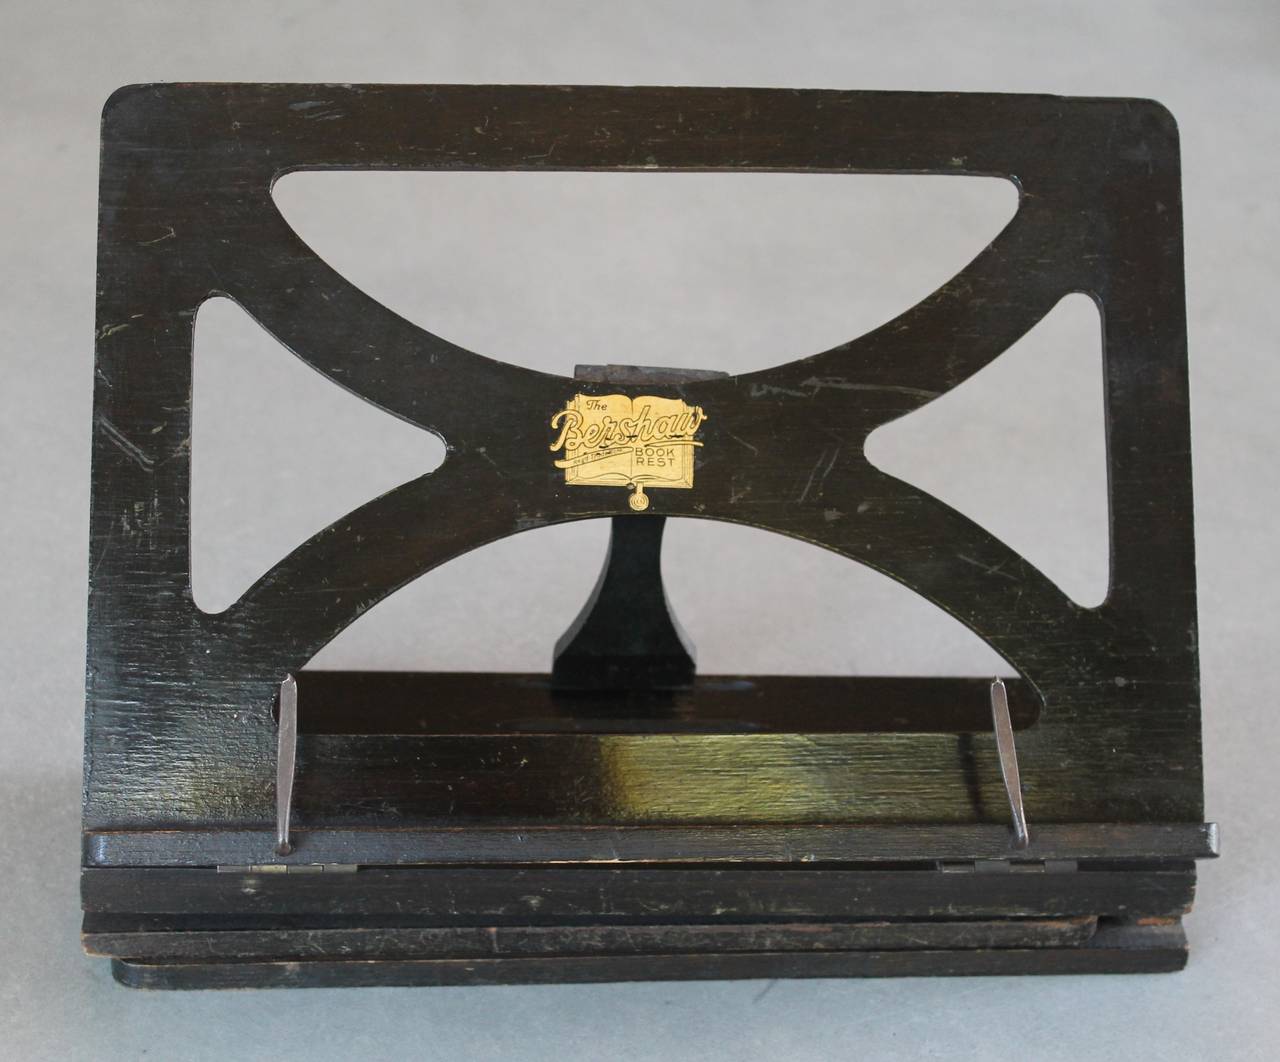 Book Rest from Bershaw in Wood, Ebonished, ca. 1920.
Usable in Two Sizes